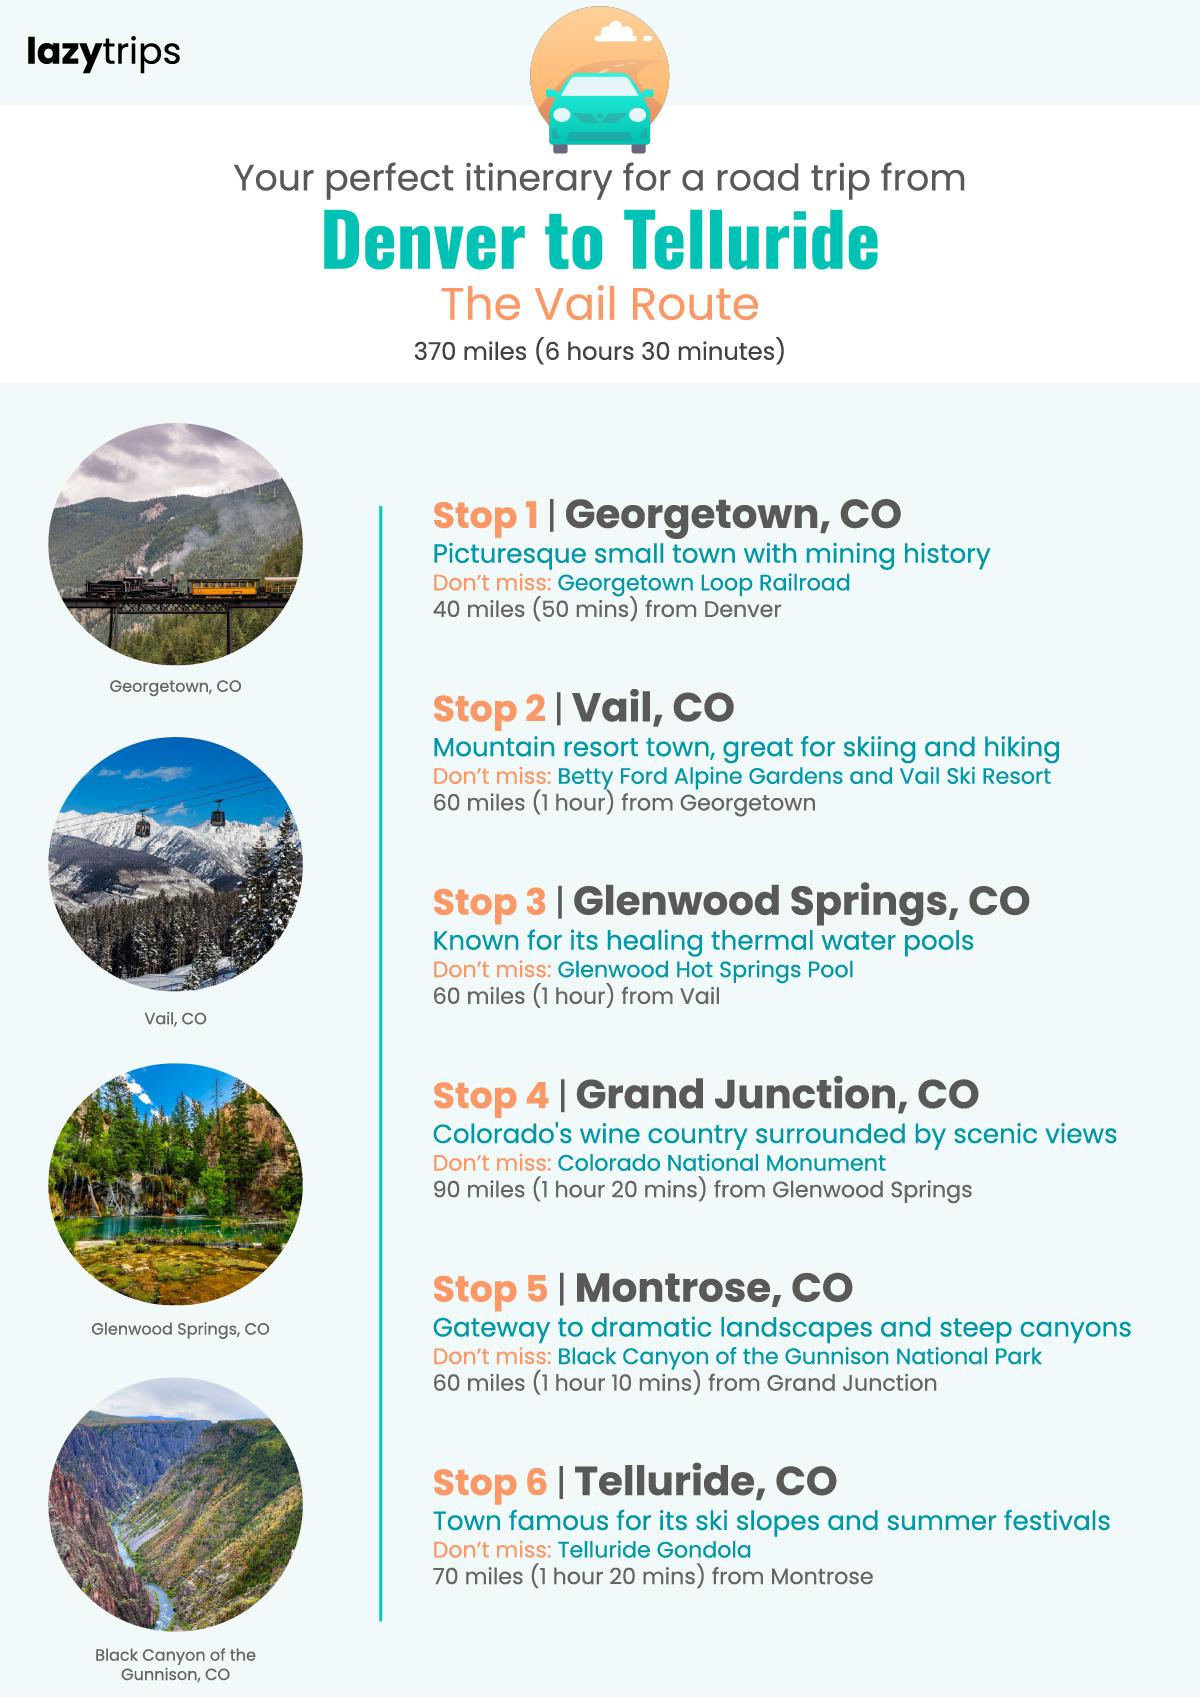 Itinerary for a road trip from Denver to Telluride, stopping in Georgetown, Vail, Glenwood Springs, Grand Junction, Montrose and Telluride